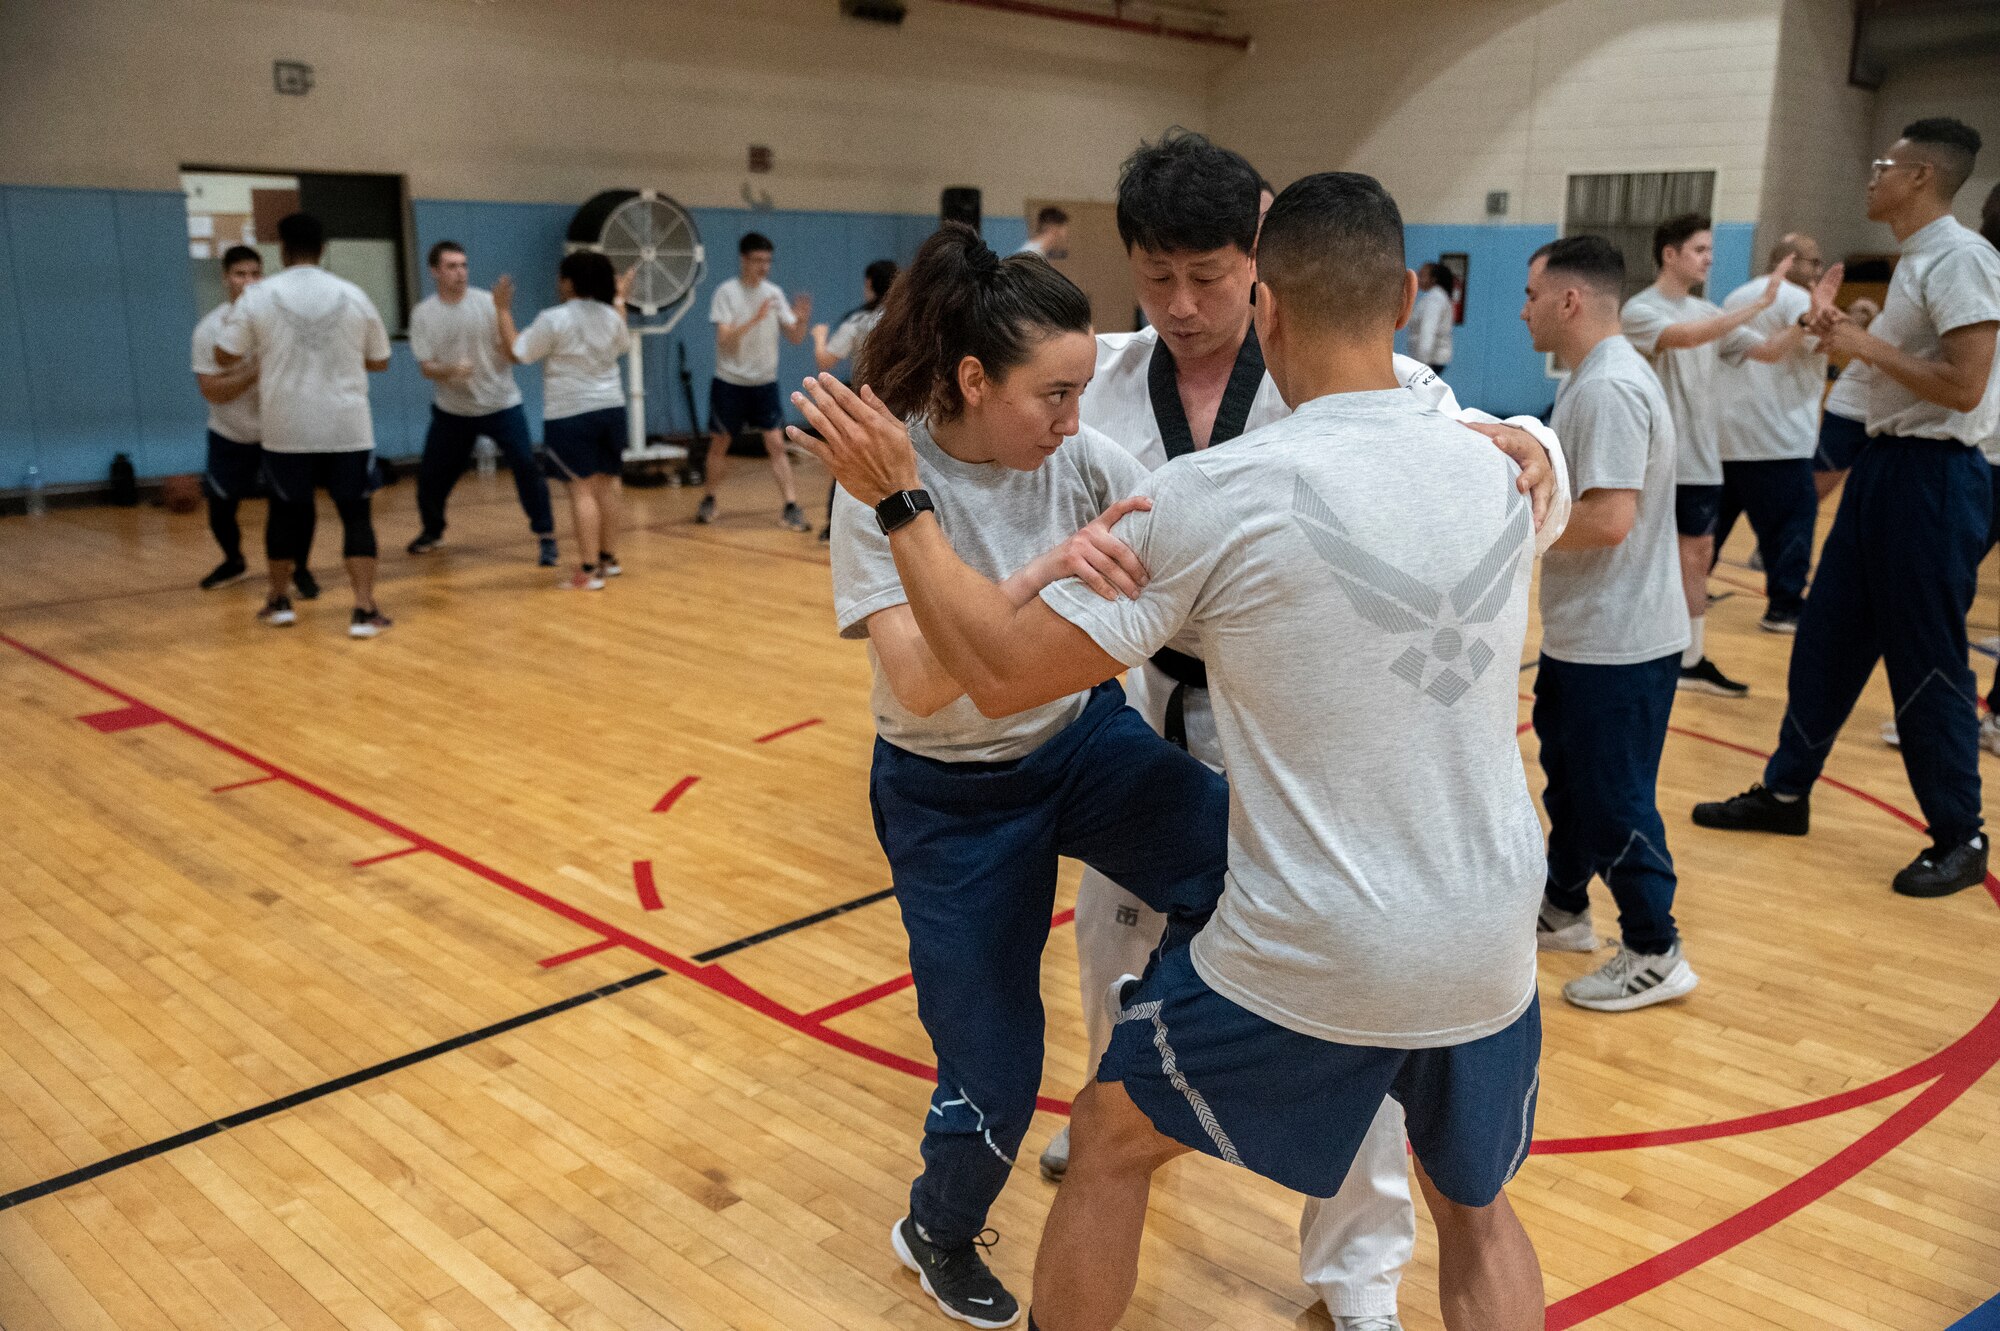 Airmen from the 51st Mission Support Group are guided by Master Doyoung Jang, Taekwondo Promotion Foundation, on how to execute proper knee strike offense motions during an MSG physical training session at Osan Air Base, Republic of Korea, June 30, 2022.